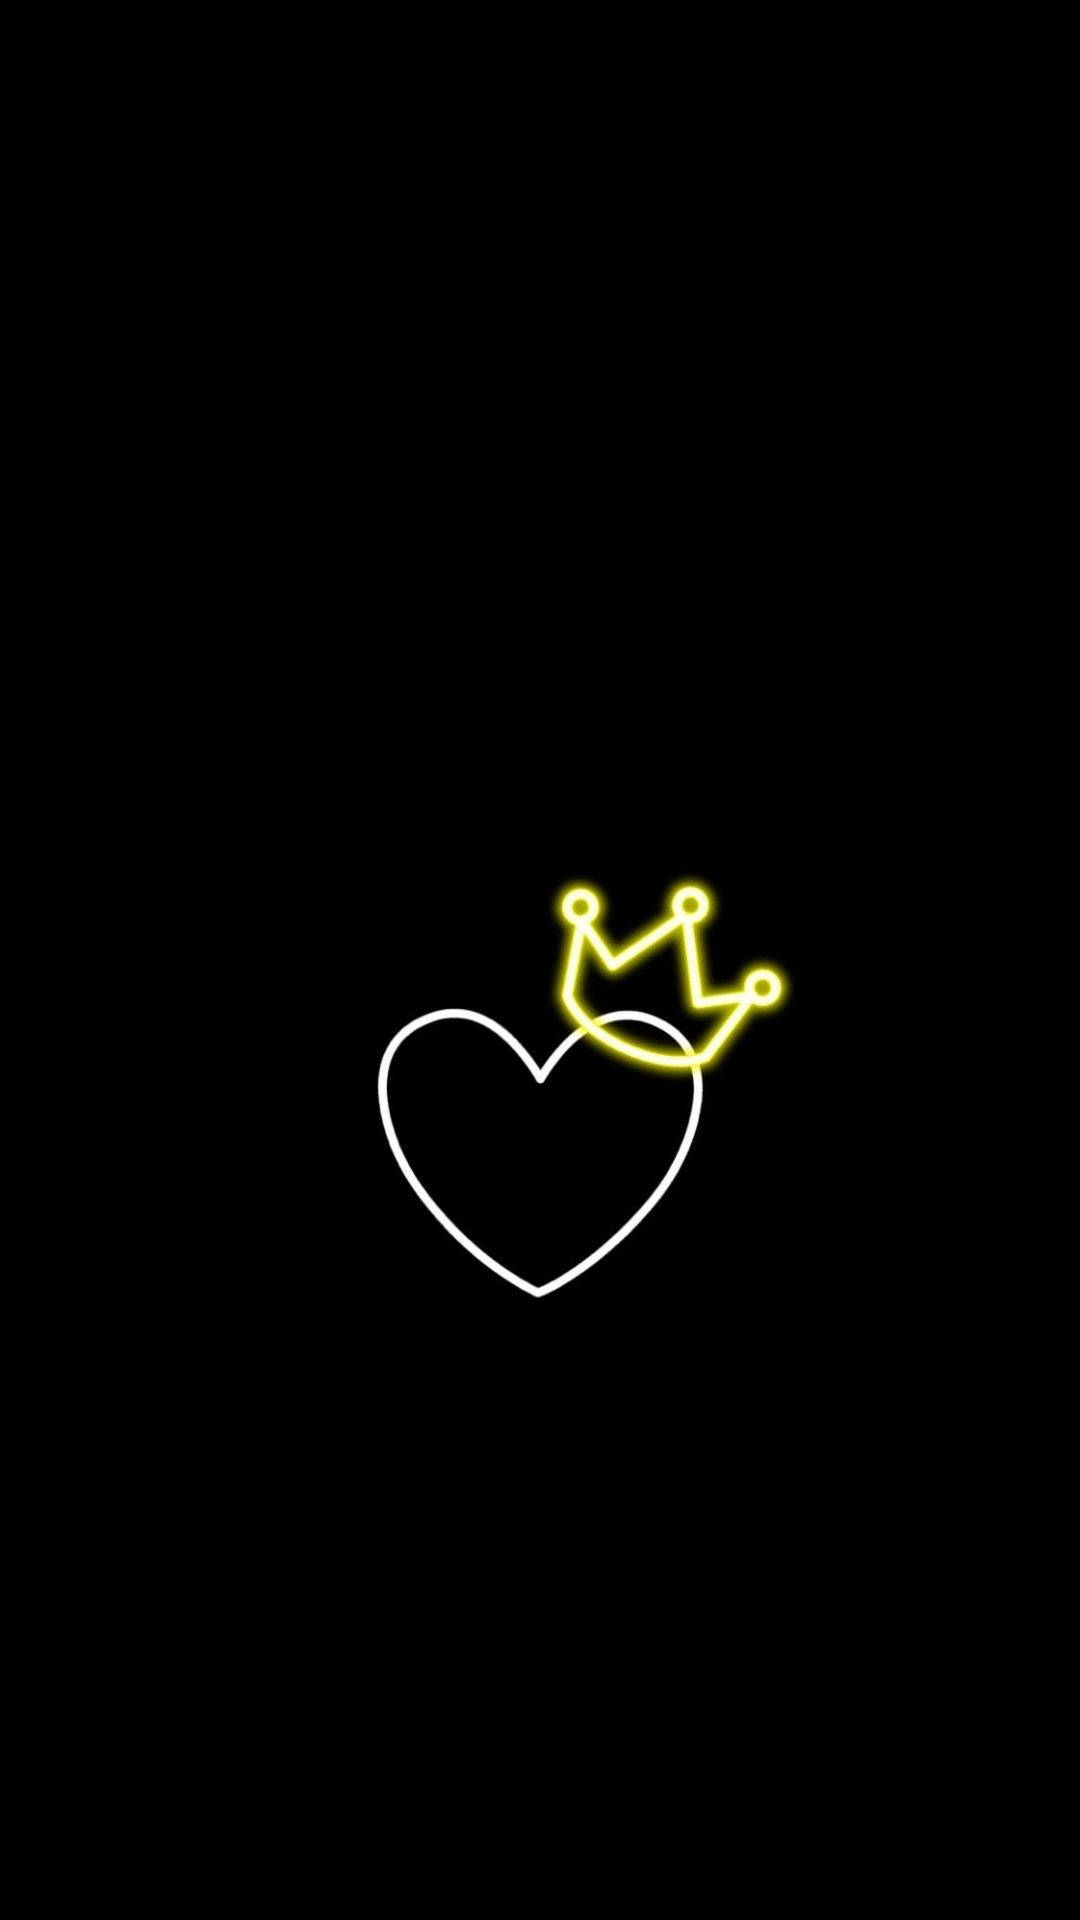 Download Black Heart With A Crown Wallpaper